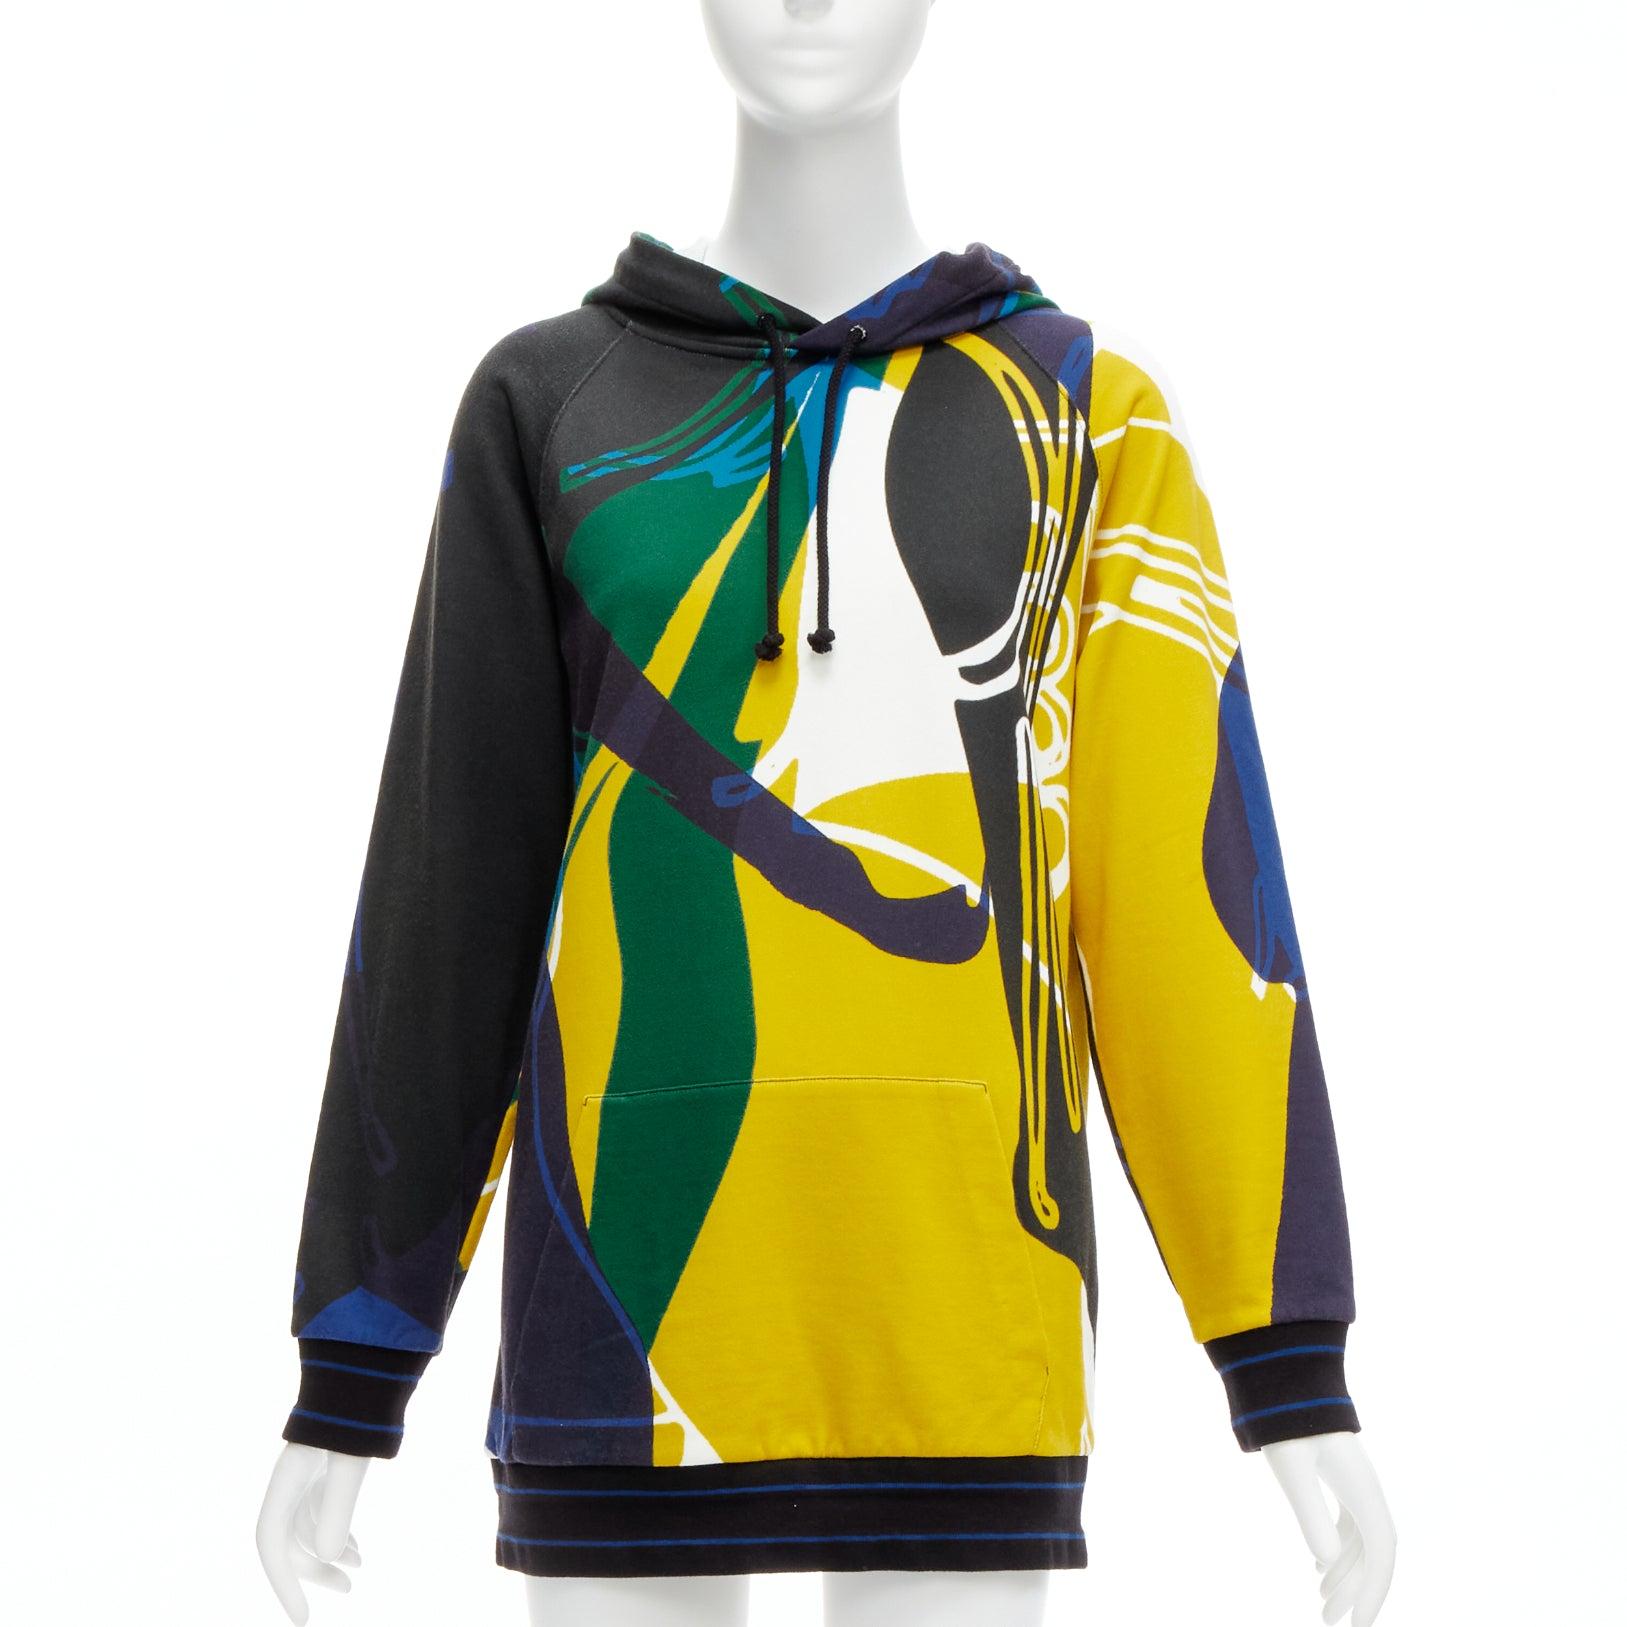 CHRISTIAN DIOR 2022 Runway logo hem abstract colorblock hoodie XS
Reference: TGAS/D00772
Brand: Christian Dior
Designer: Maria Grazia Chiuri
Collection: Cruise 2022 Look 39 - Runway
Material: Cotton
Color: Multicolour
Pattern: Abstract
Closure: